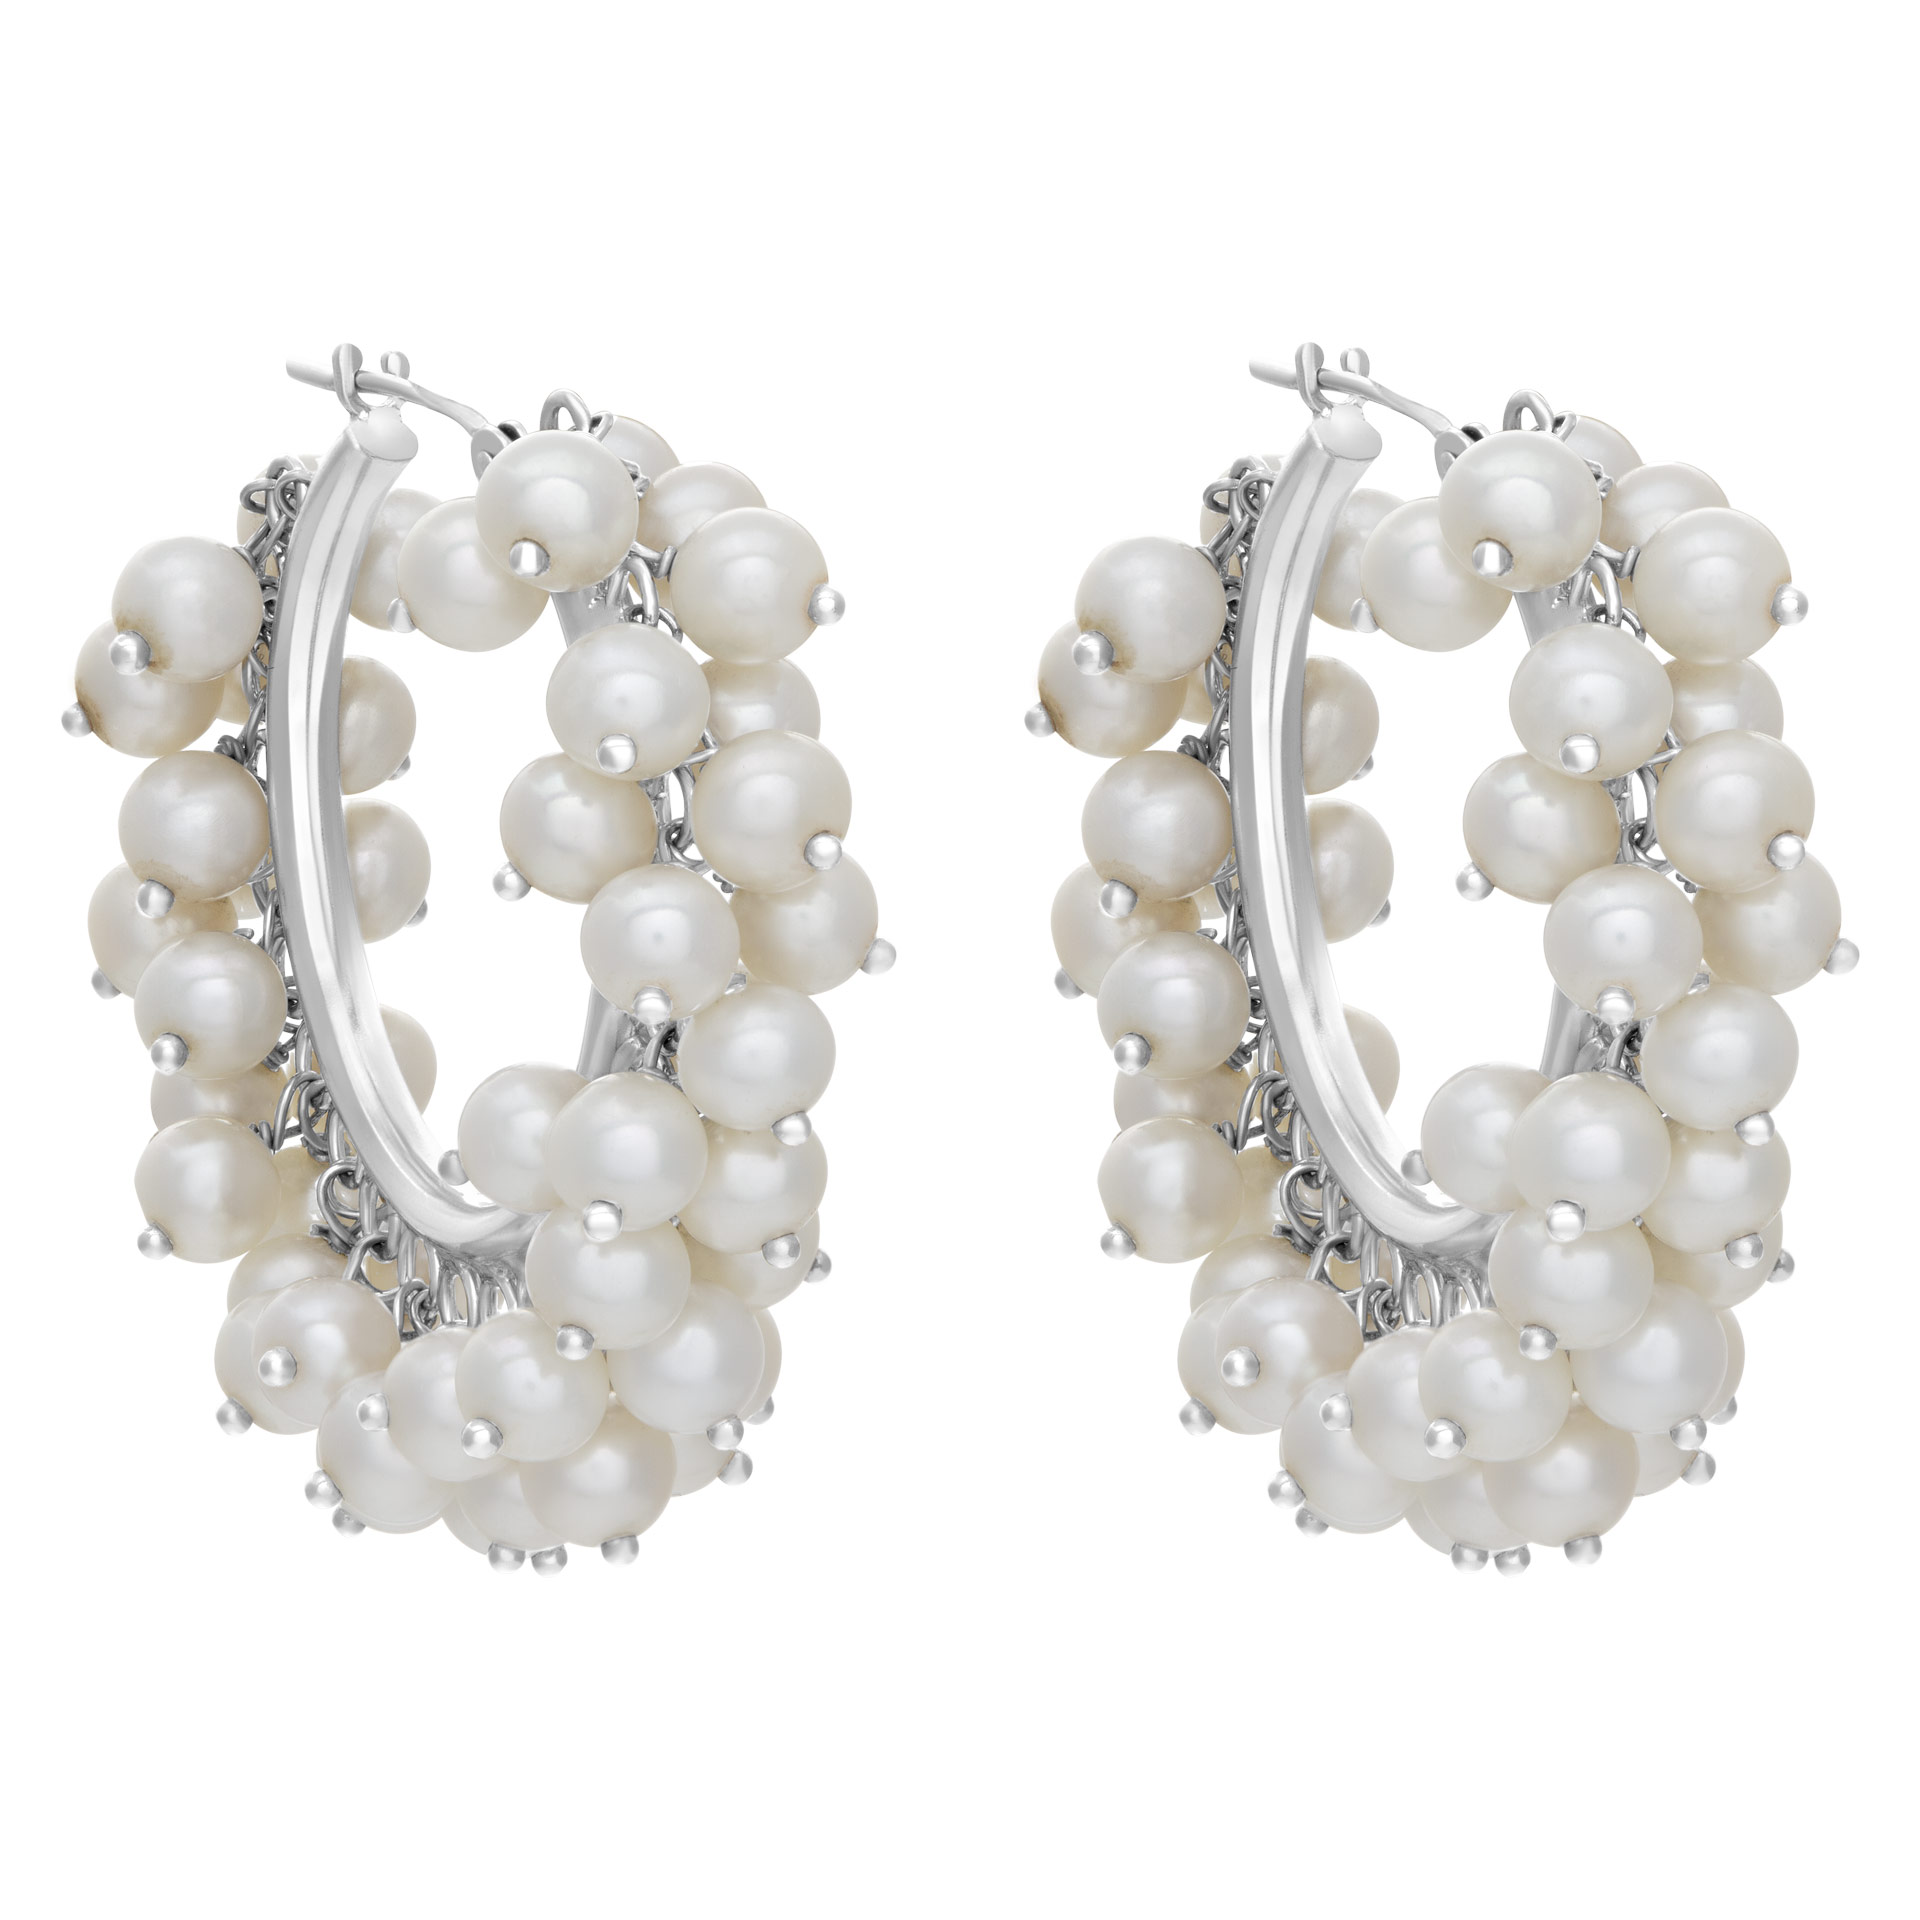 Earrings in white 14k white gold with pearls in motion image 1